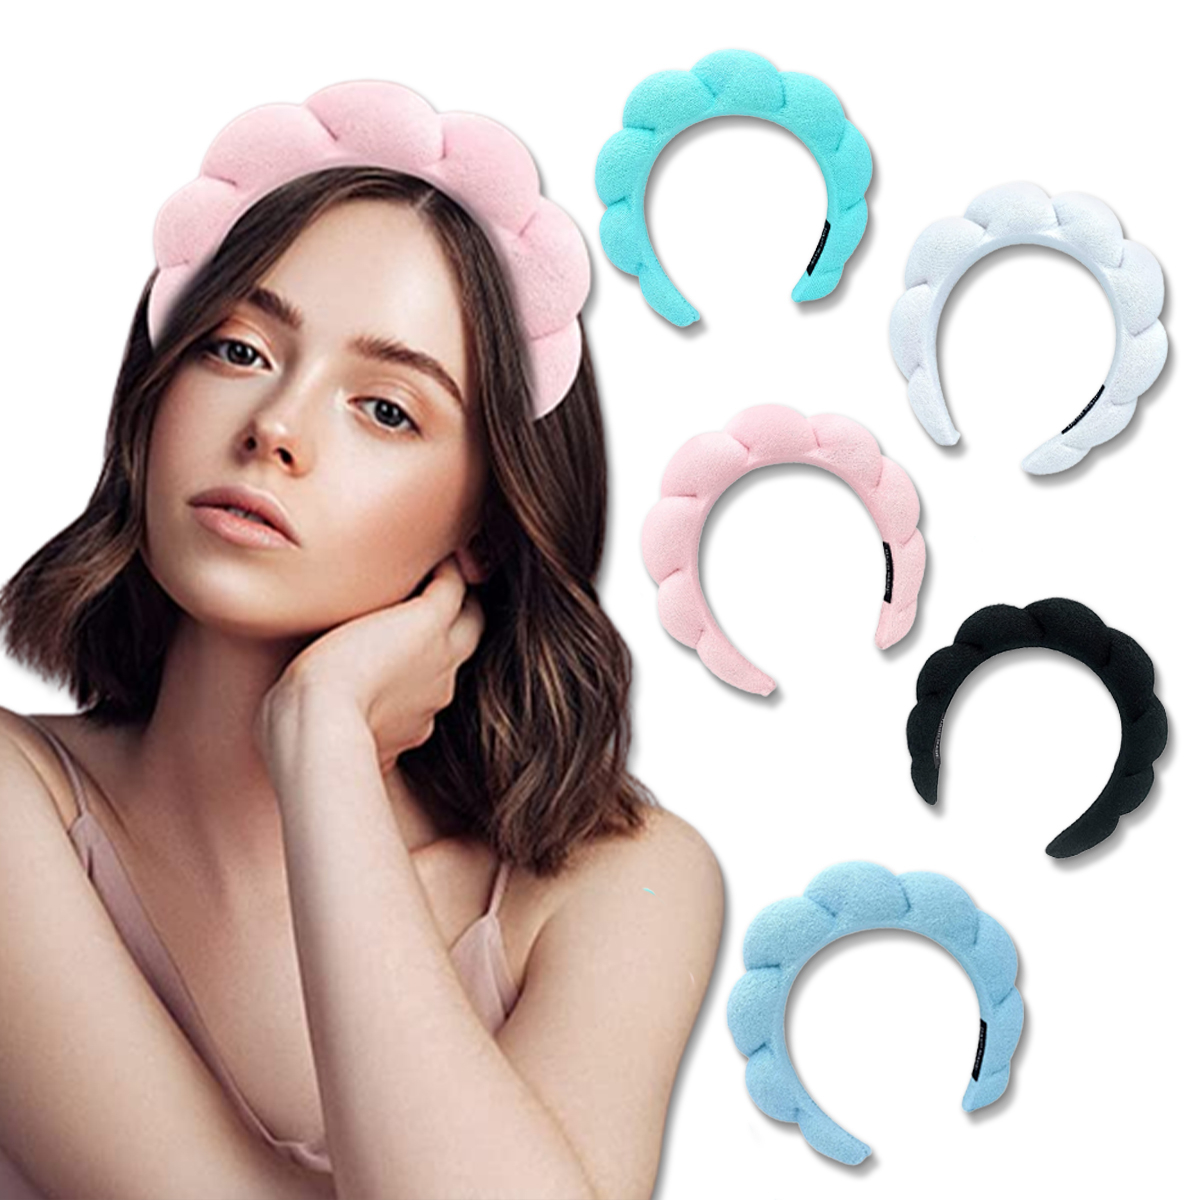 That Headband You've Seen in Every TikTok Tutorial Is Only $8